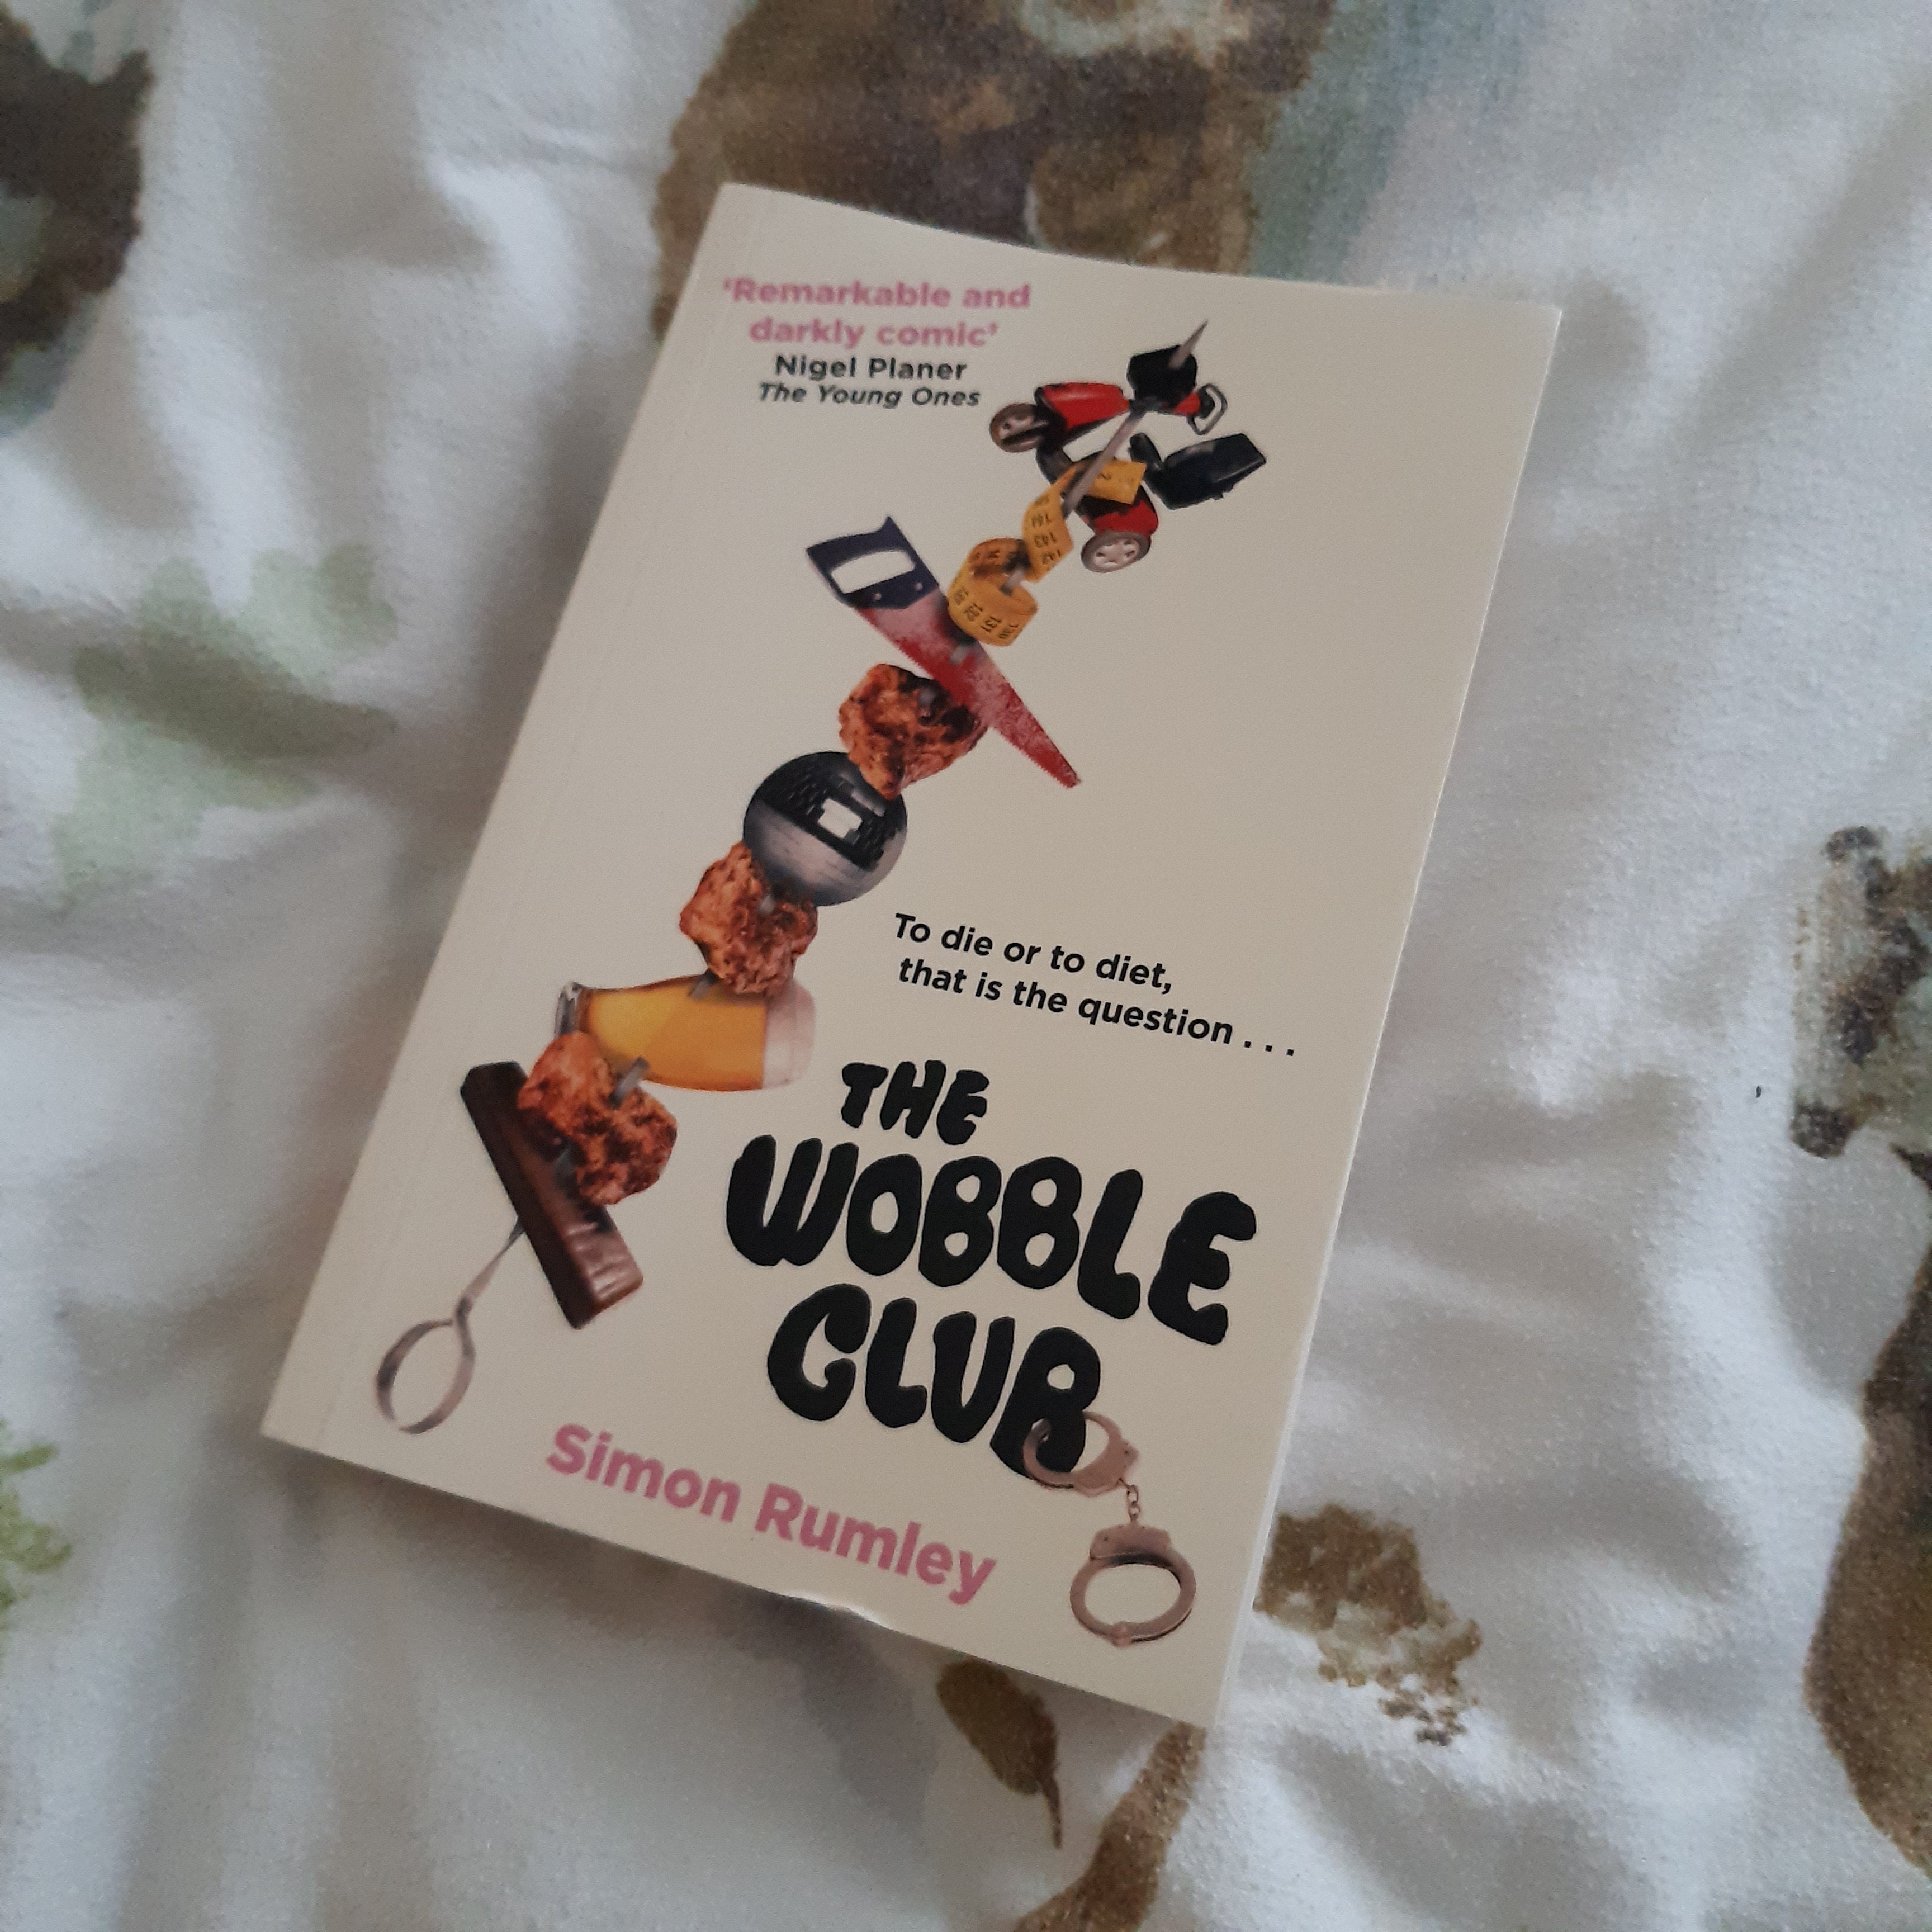 Book Review: Simon Rumley's THE WOBBLE CLUB